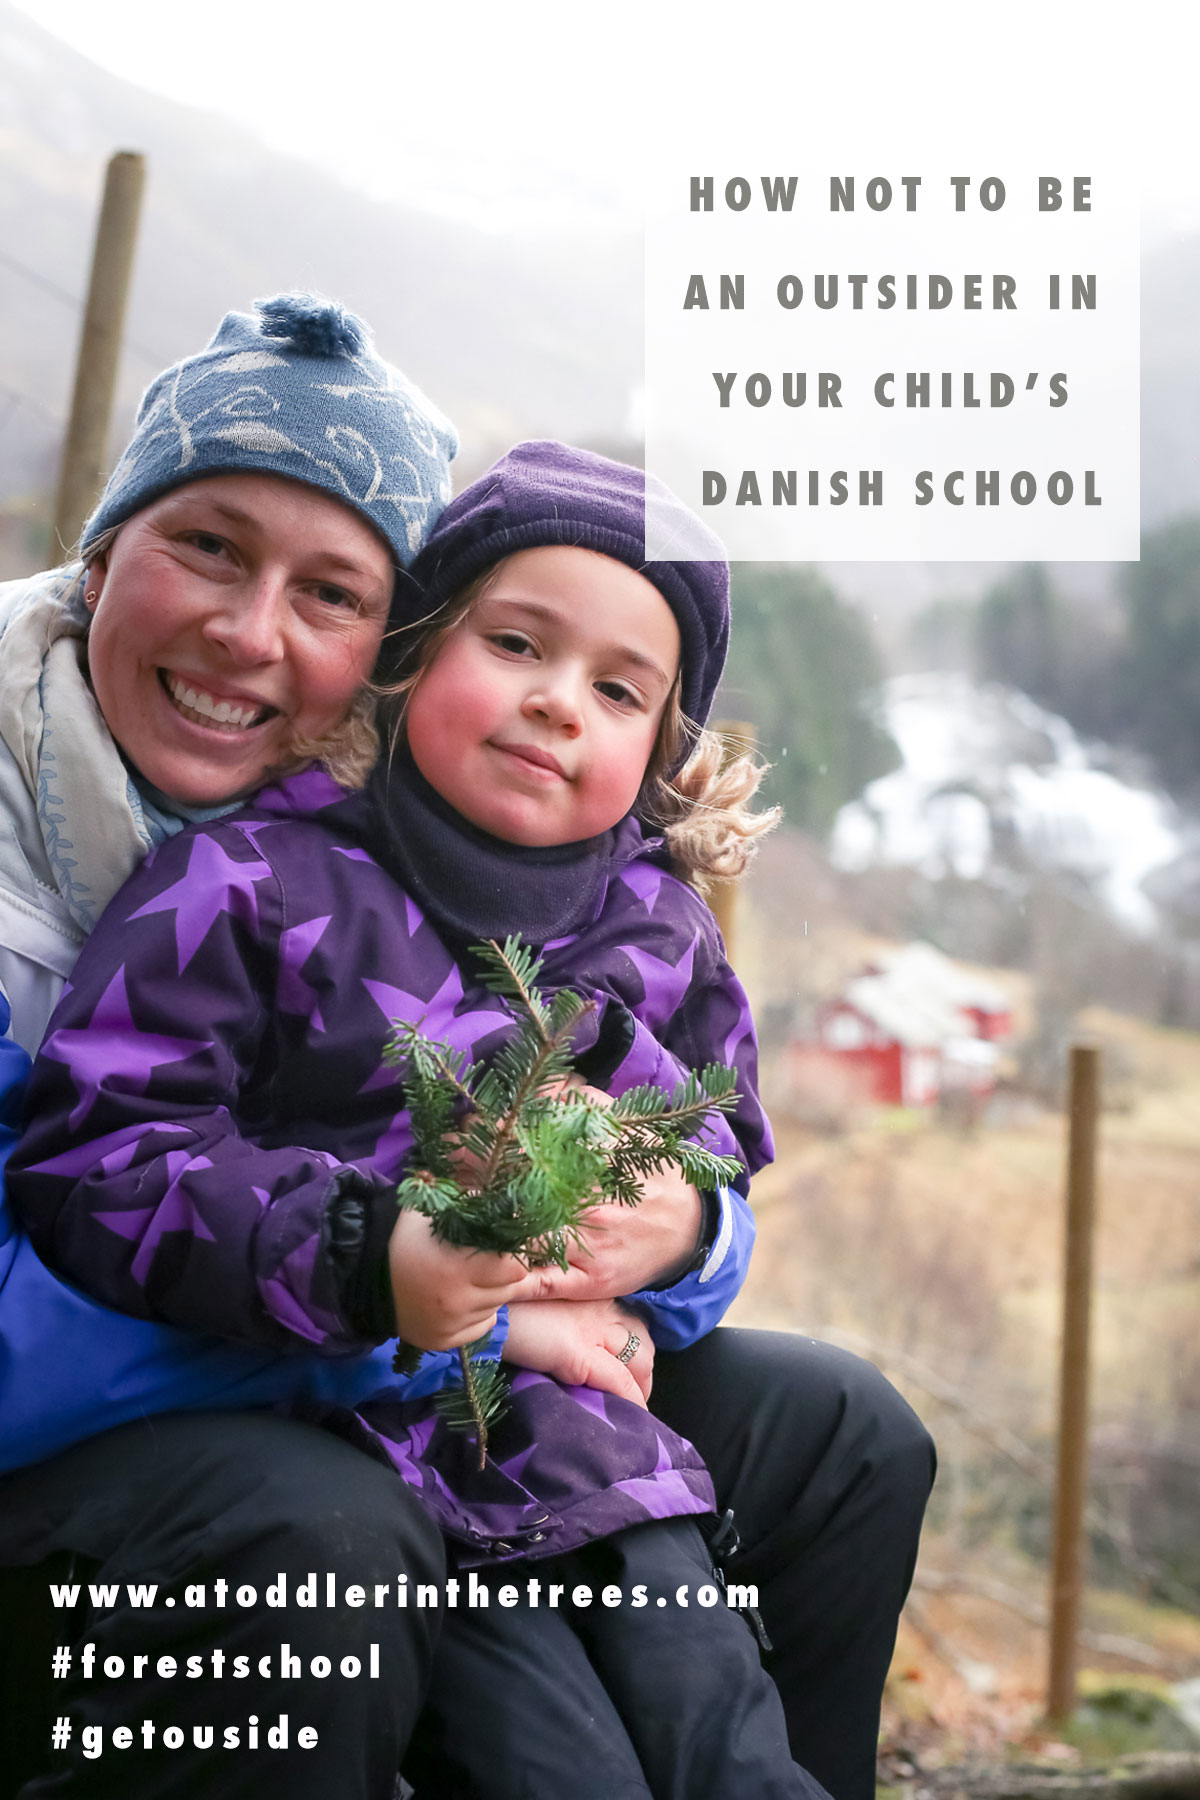 Tips and tricks from a fellow expat and forest school parent on how to stop being an outsider at your child's Danish school. 